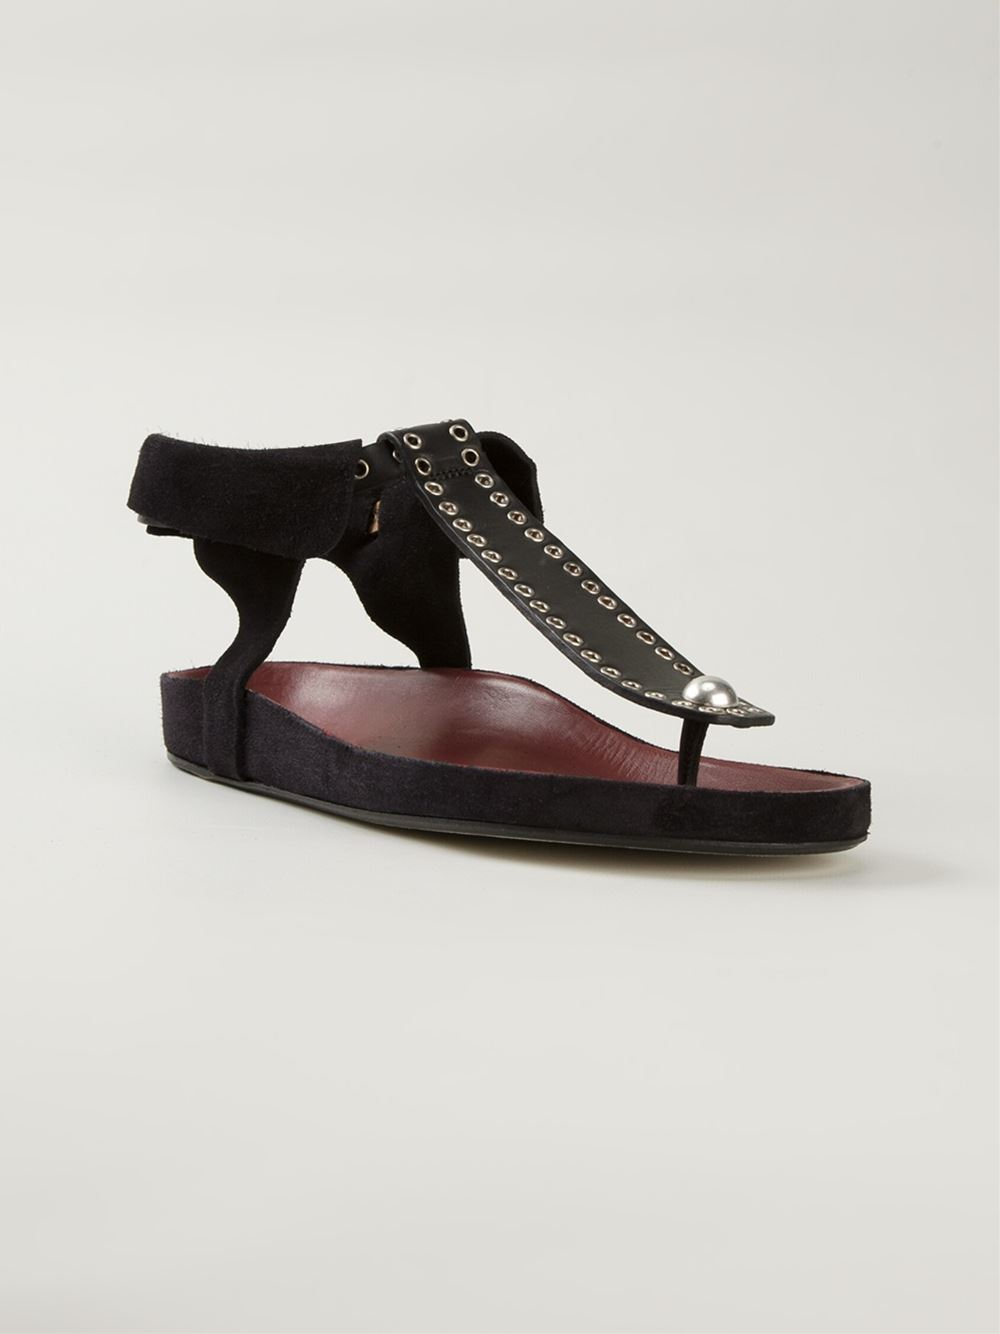 Isabel Marant 'Lapsy' Sandals in Black | Lyst